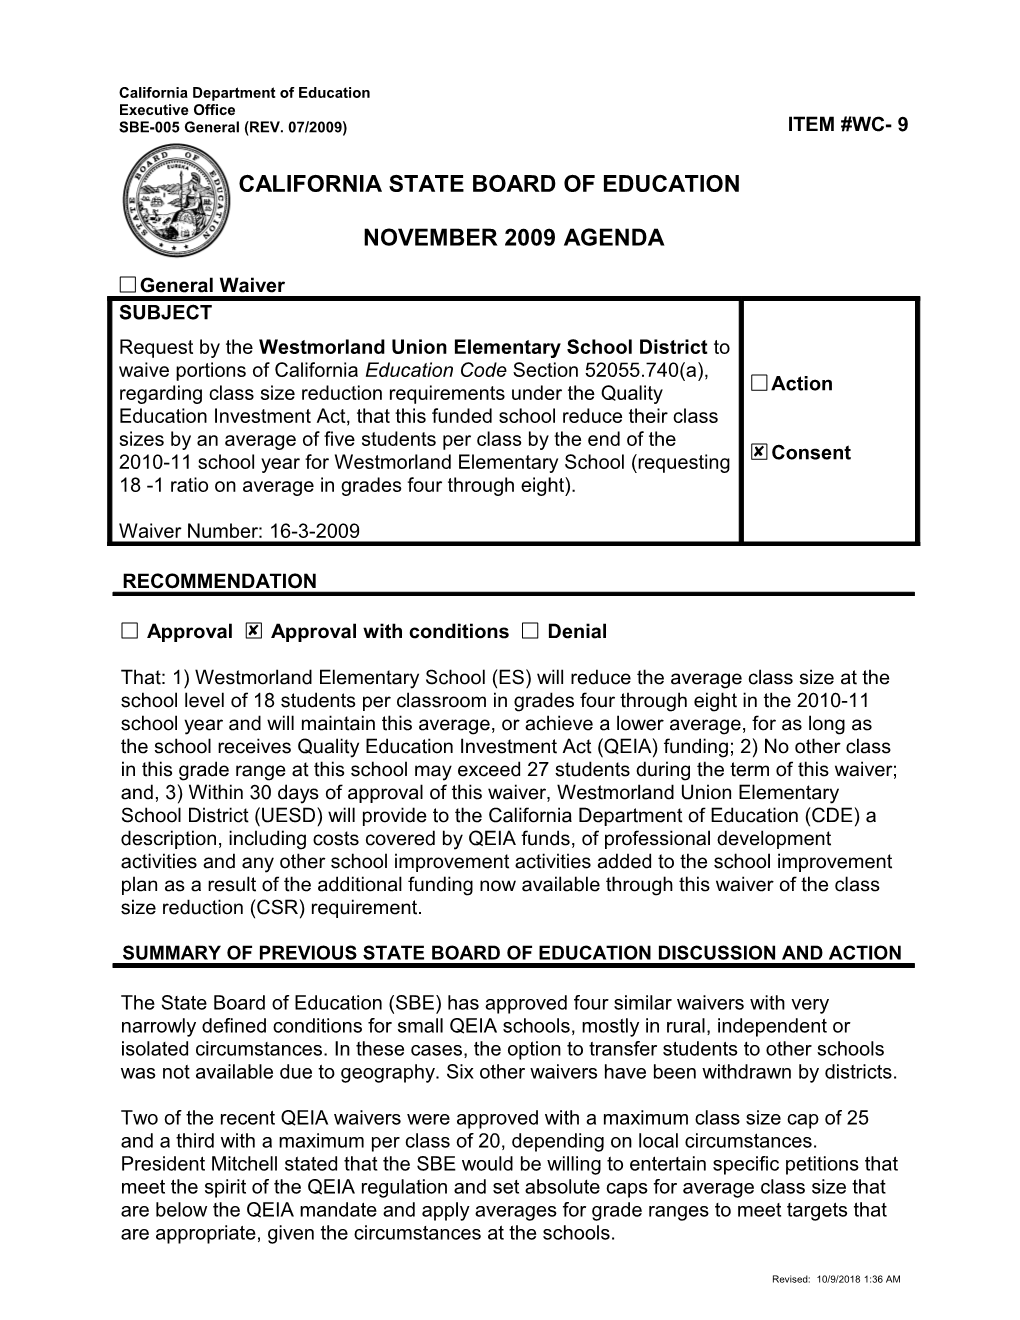 November 2009 Waiver Item WC9 - Meeting Agendas (CA State Board of Education